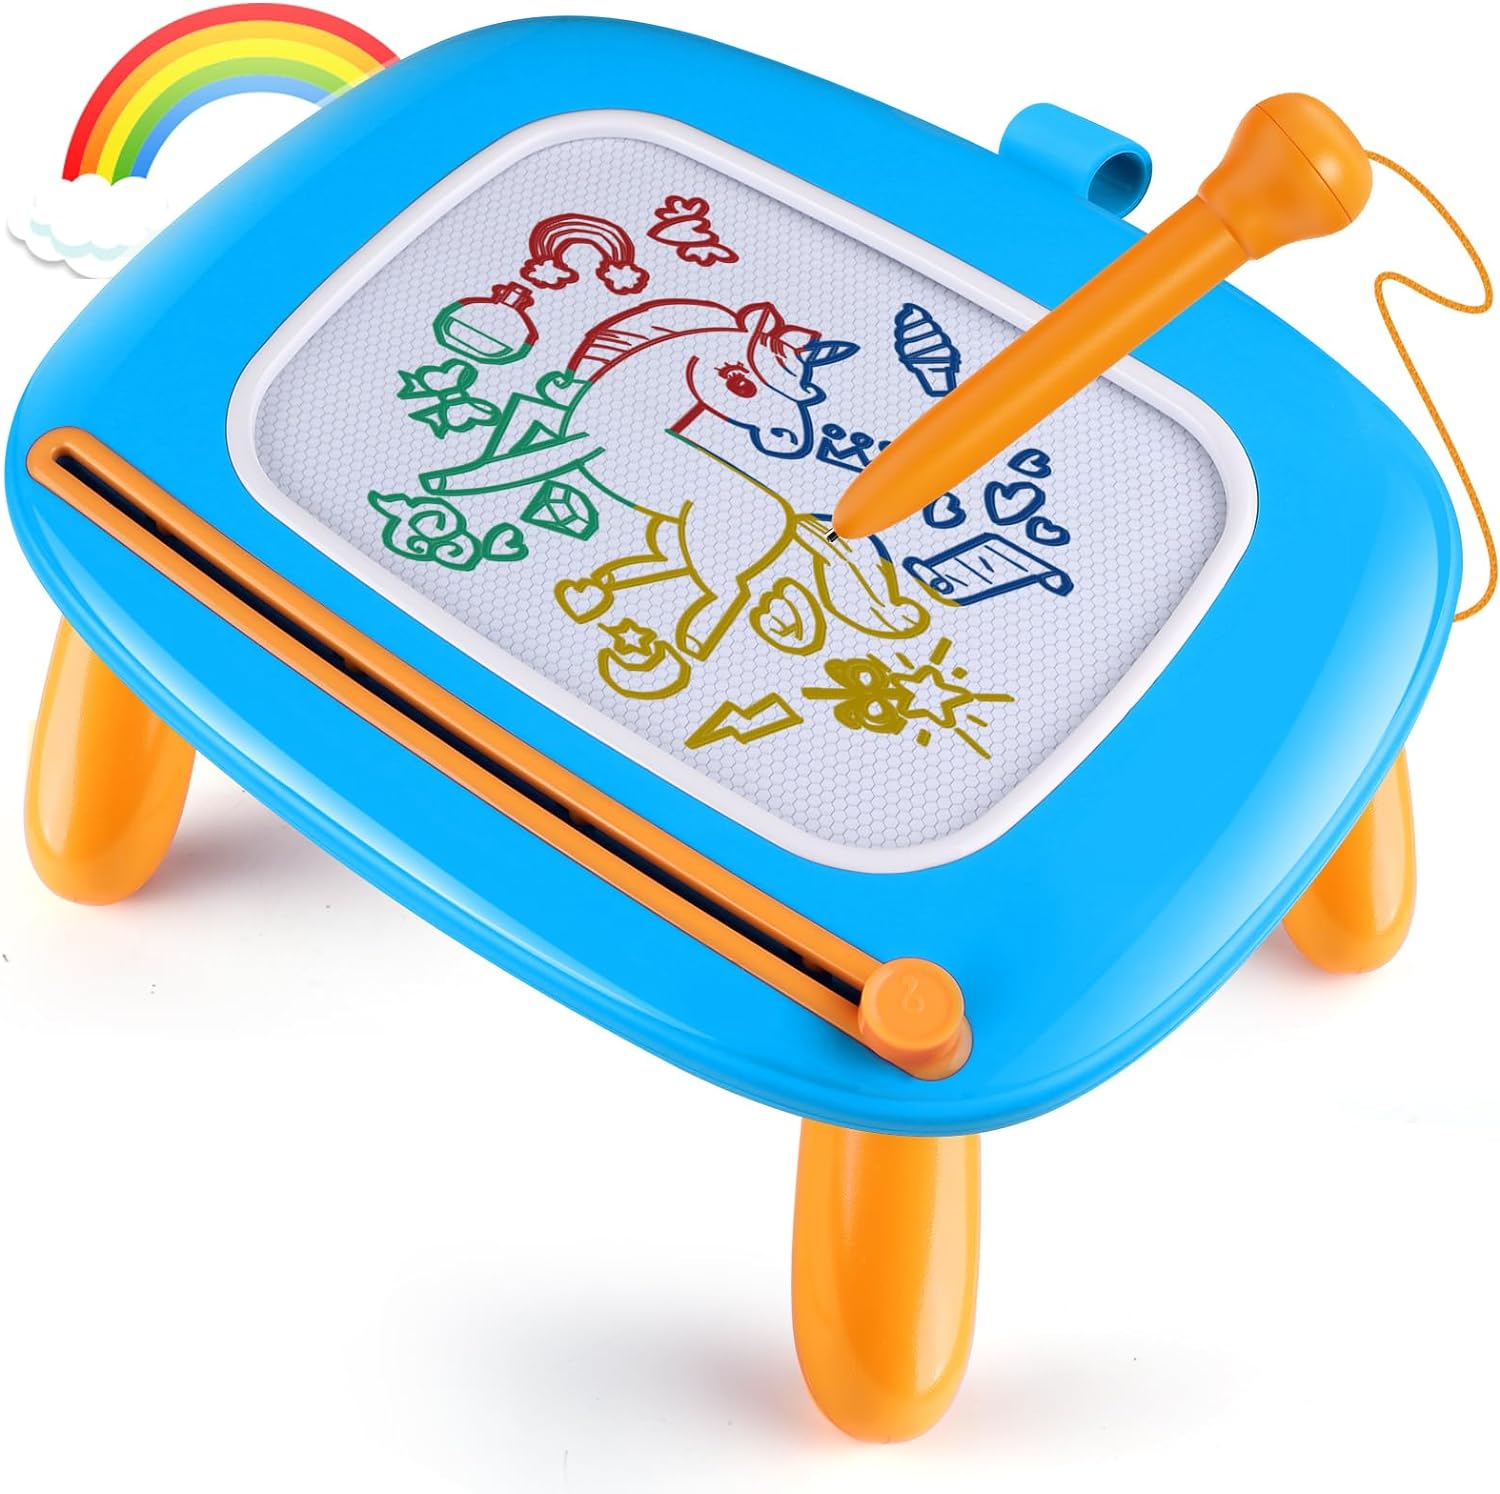 💥Smasiagon Toddler Girl Boy Toys - Magnetic Drawing Board for Toddlers 1-3 - Early Learning Doodle Board Writing Painting Sketch Pad - Birthday Christmas Halloween Easter Gifts for 1 2 3 Year Old (Blue) - 20% Off! 💲19.99 Only!